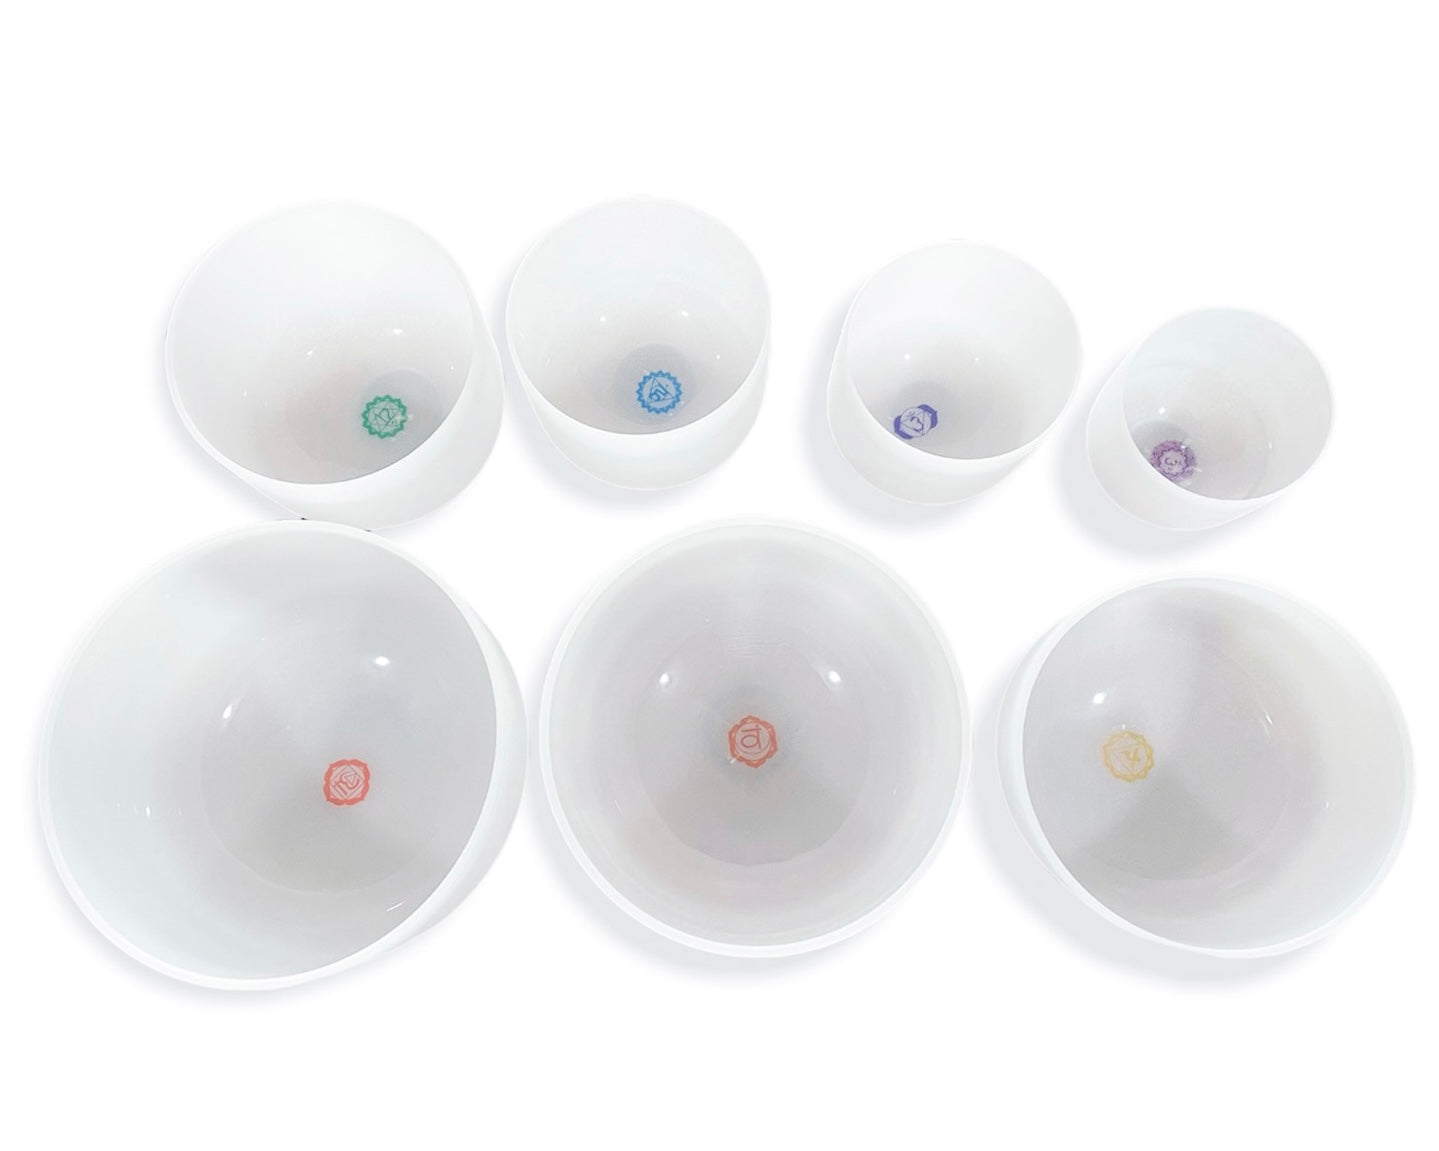 Chakra Crystal Singing Bowl Set with Carrying Case